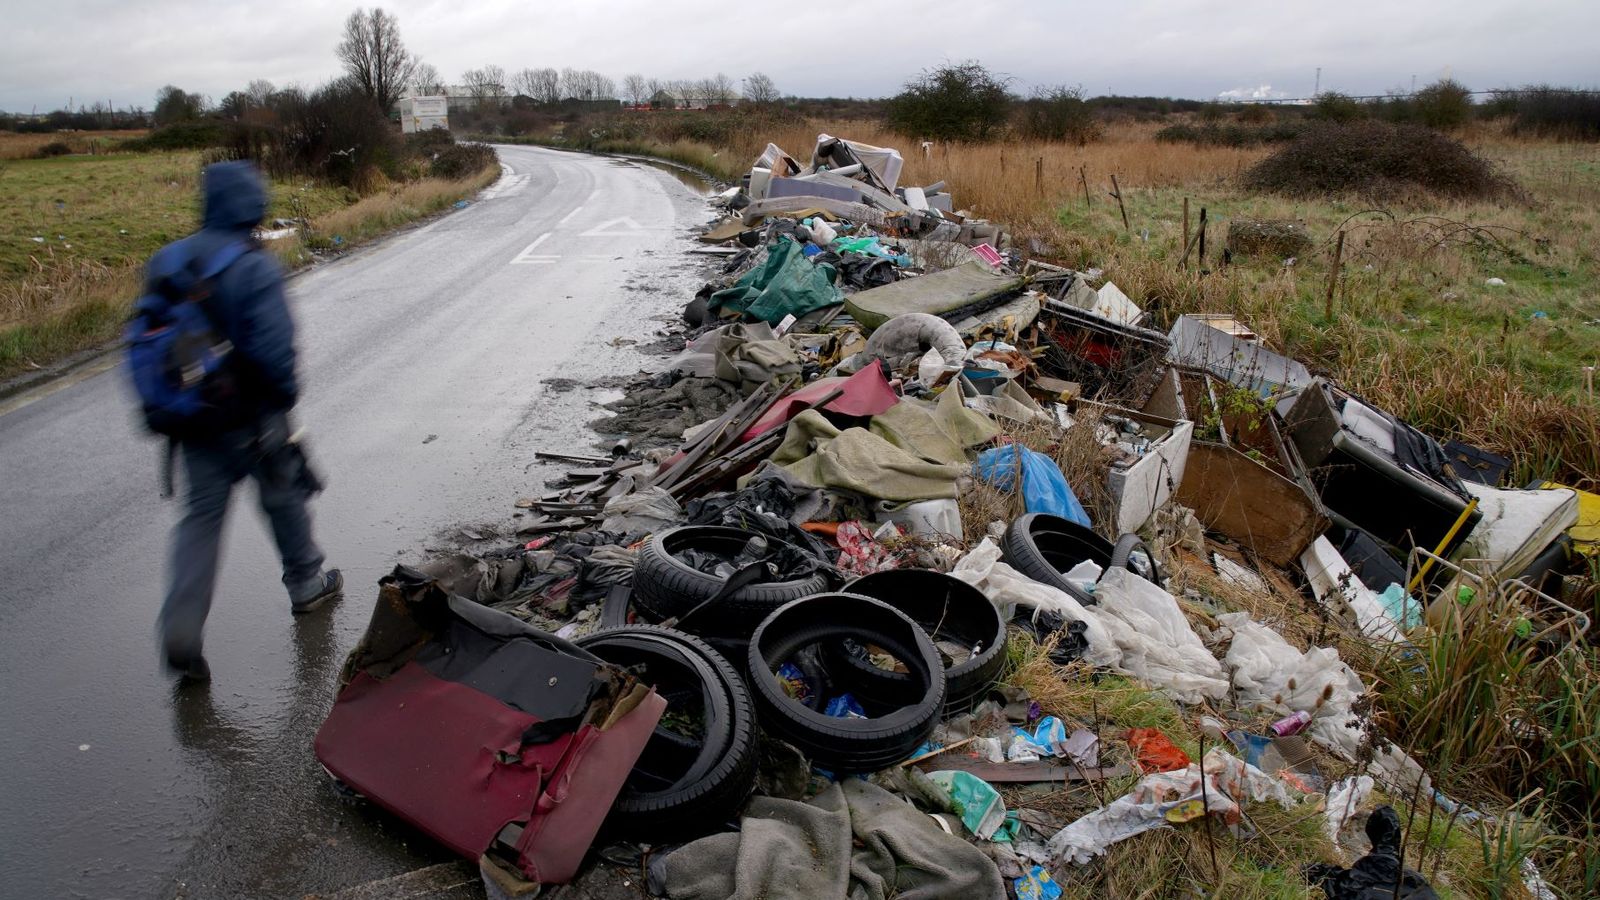 Fly-tipping gangs are costing council millions, new study reveals, UK News